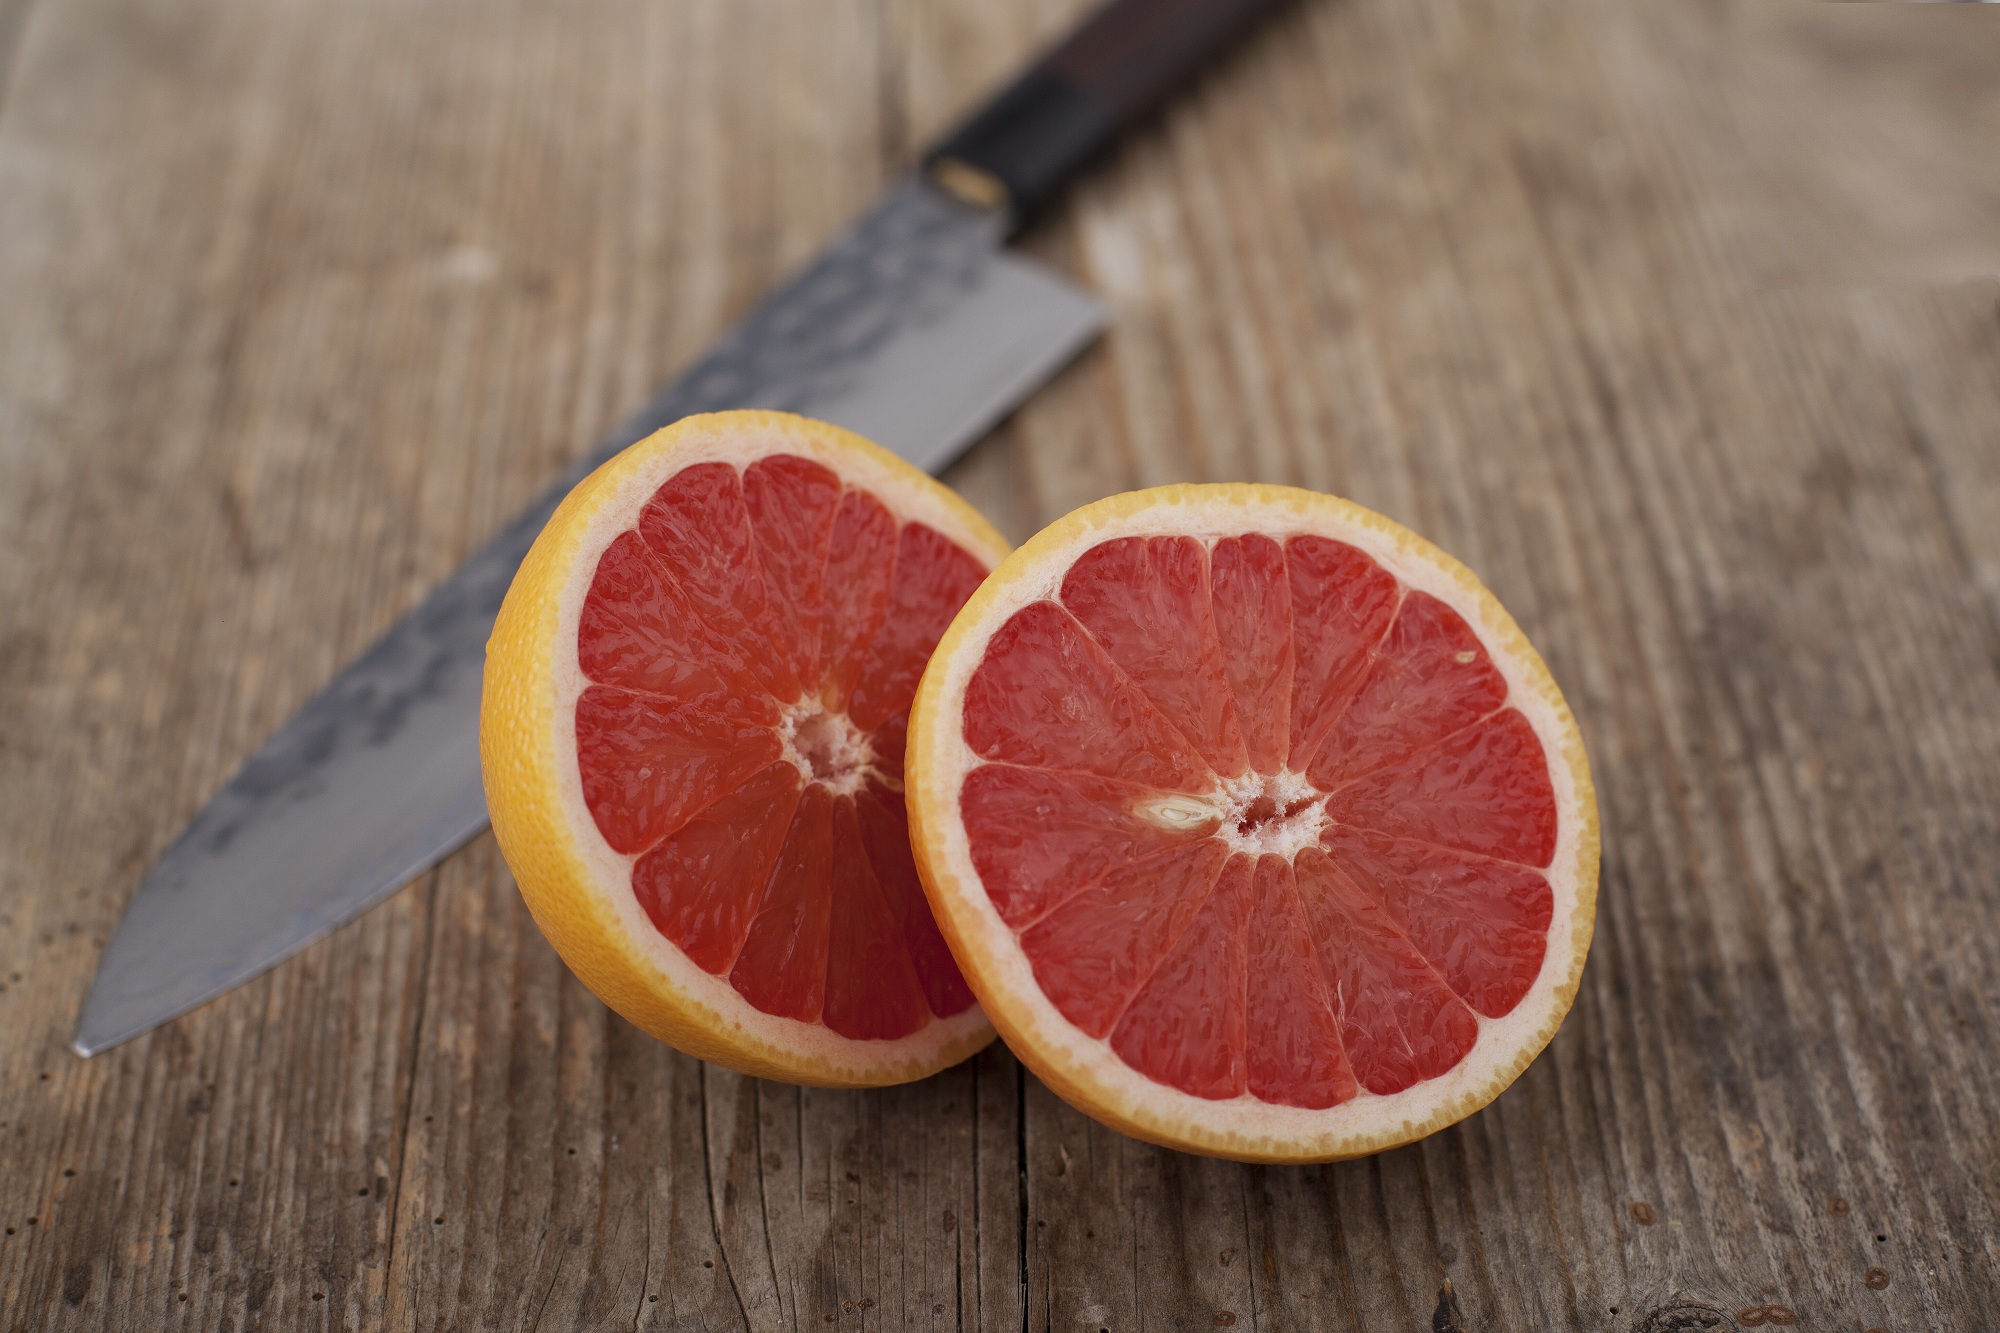 Grapefruits on wooden surface